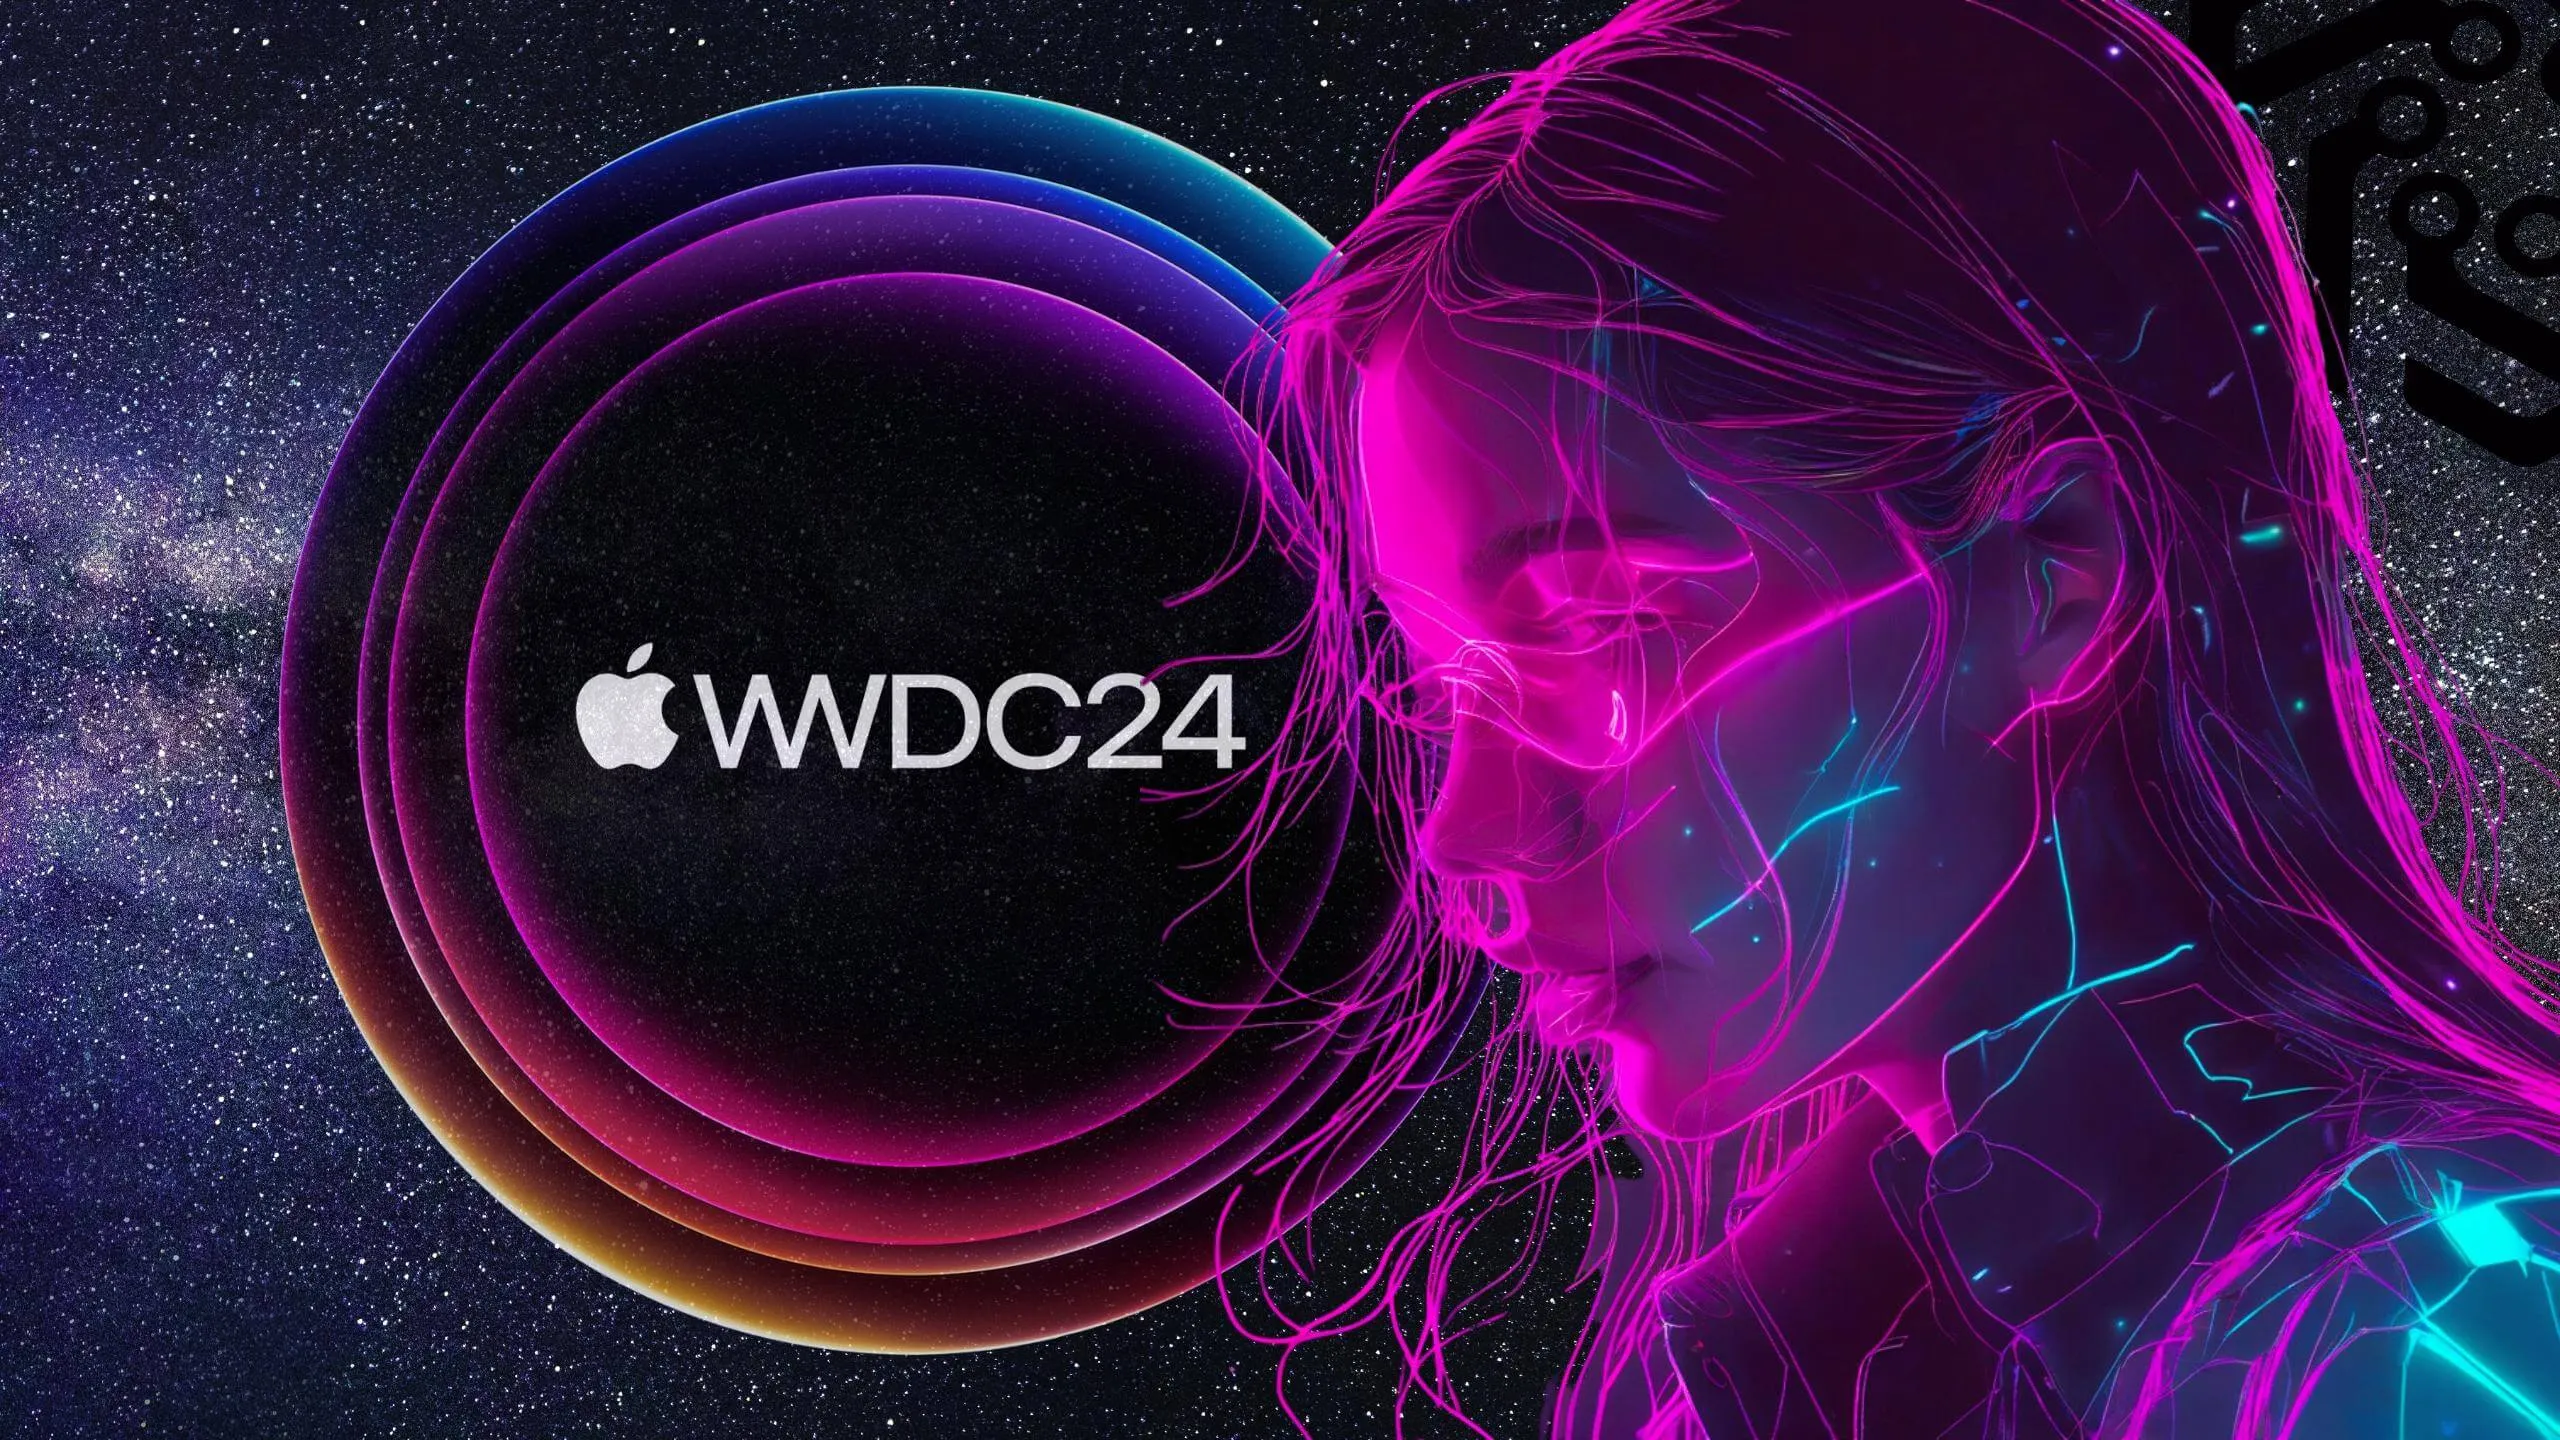 WWDC24 logo in circles and girl draw with neon style line